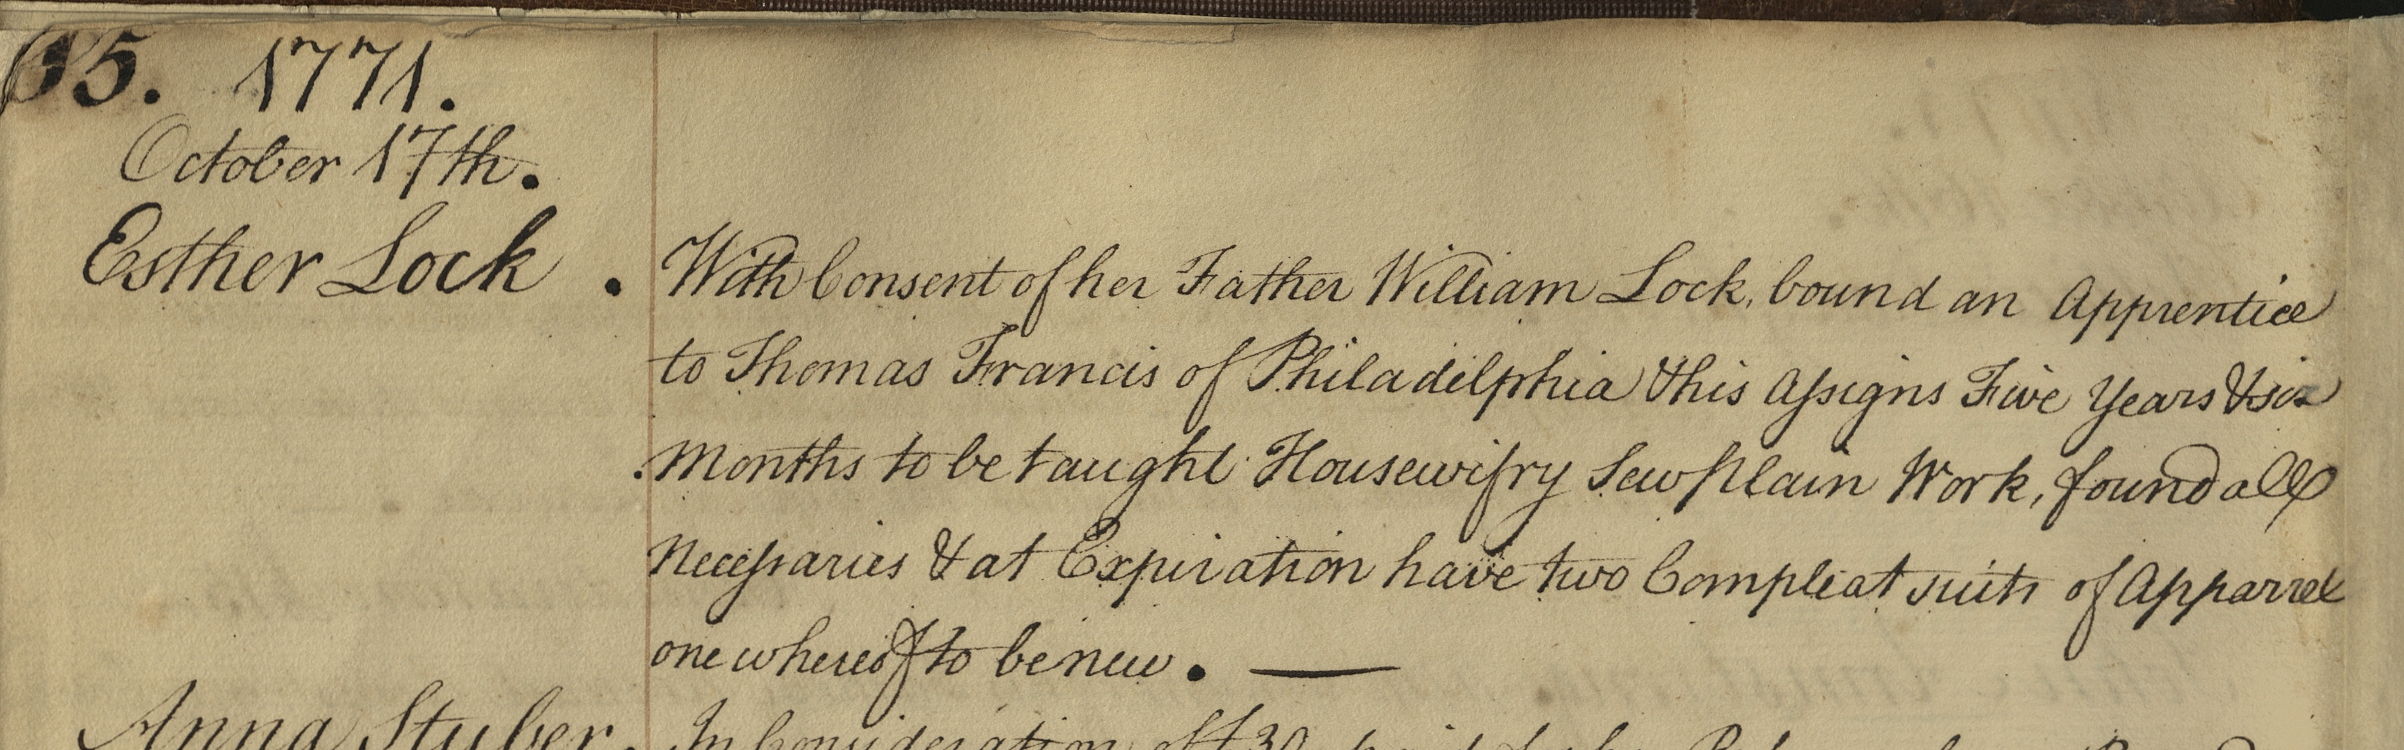 Esther's Lock's entry in the Indentured Servant Records